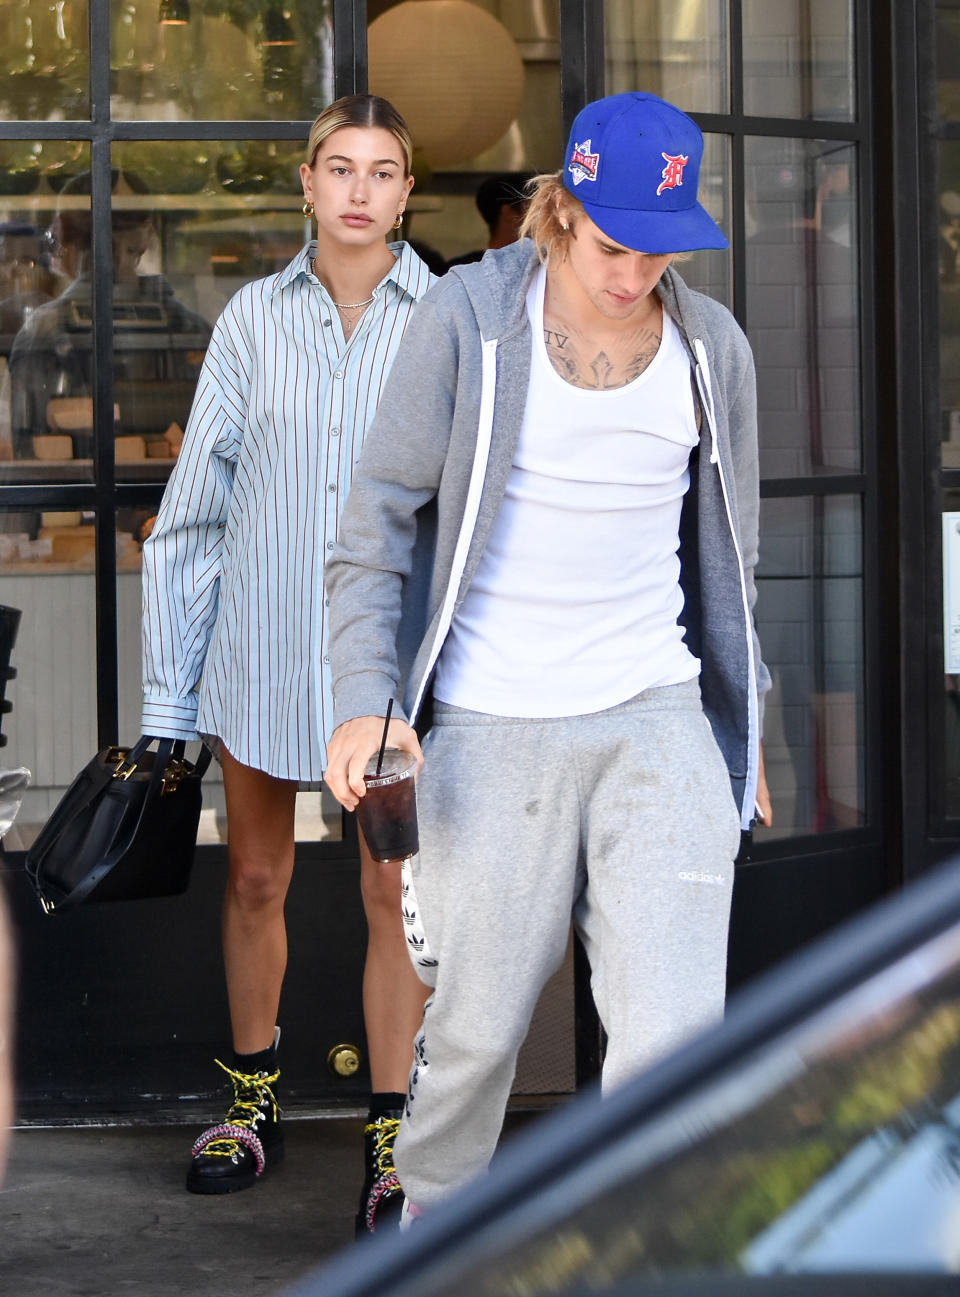 Hailey Baldwin and Justin Bieber spotted together in Los Angeles in October.&nbsp; (Photo: BG015/Bauer-Griffin via Getty Images)